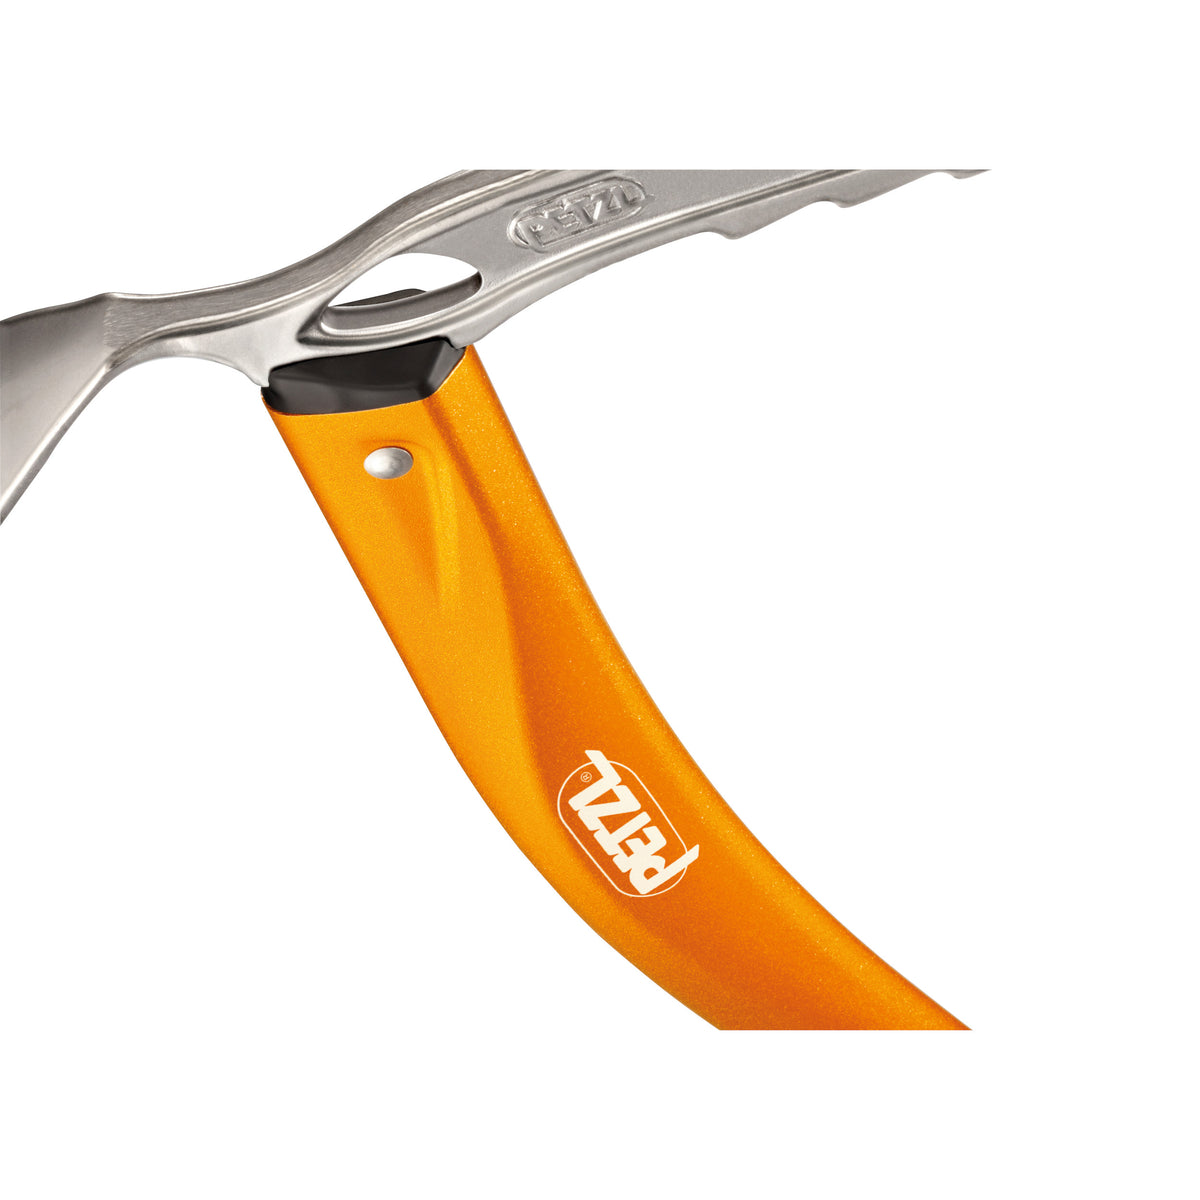 Petzl Summit Evo Ice Axe, close up view of the head